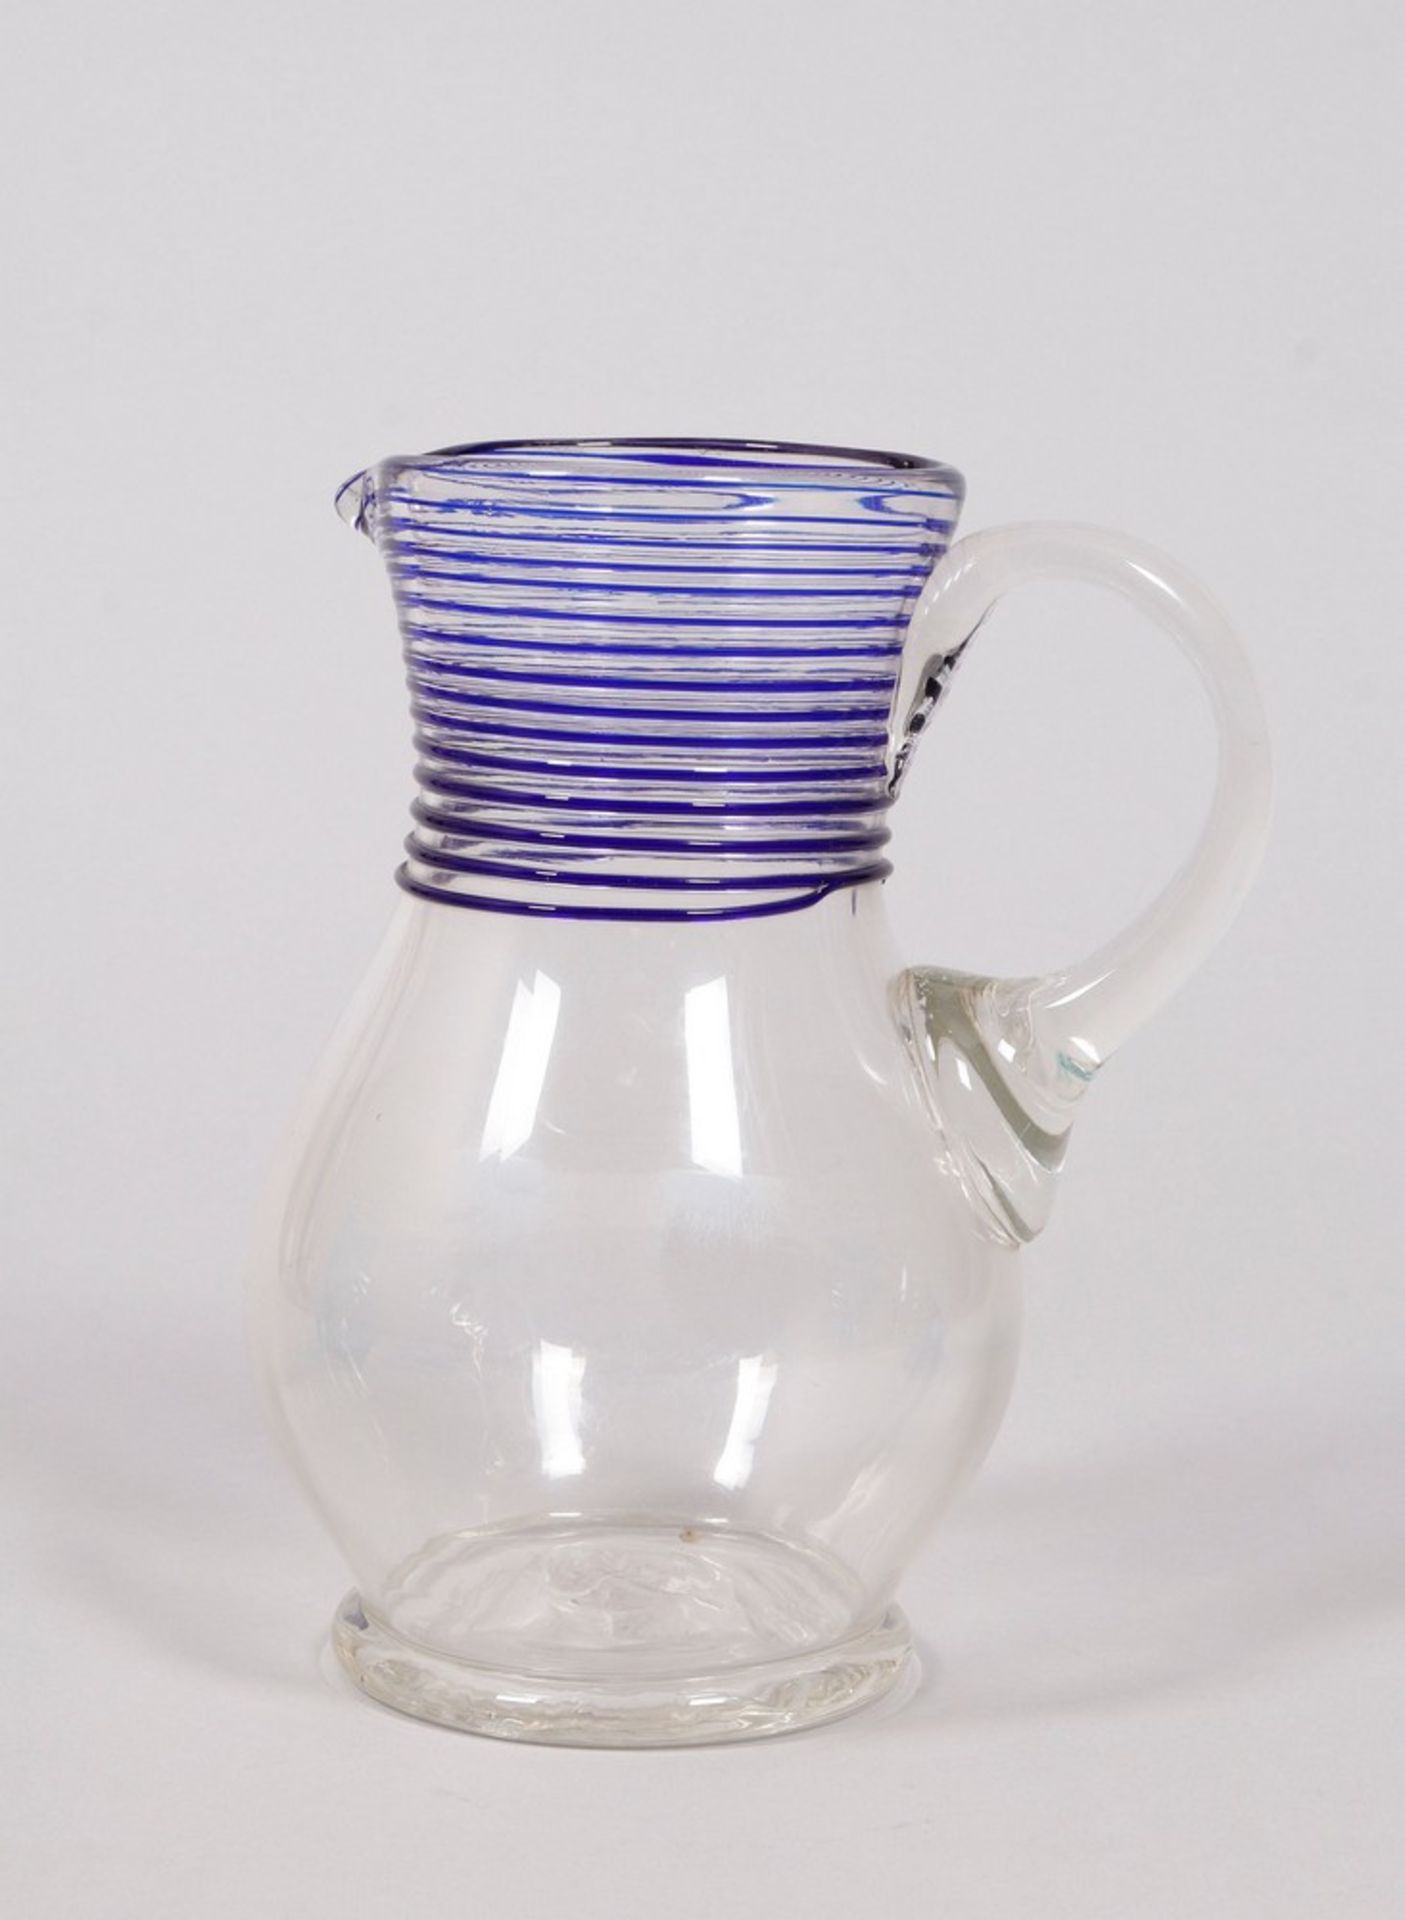 Mixed lot of glass jugs in blue, 3 pieces, German/Bohemian, 19th/20th C. - Image 5 of 6